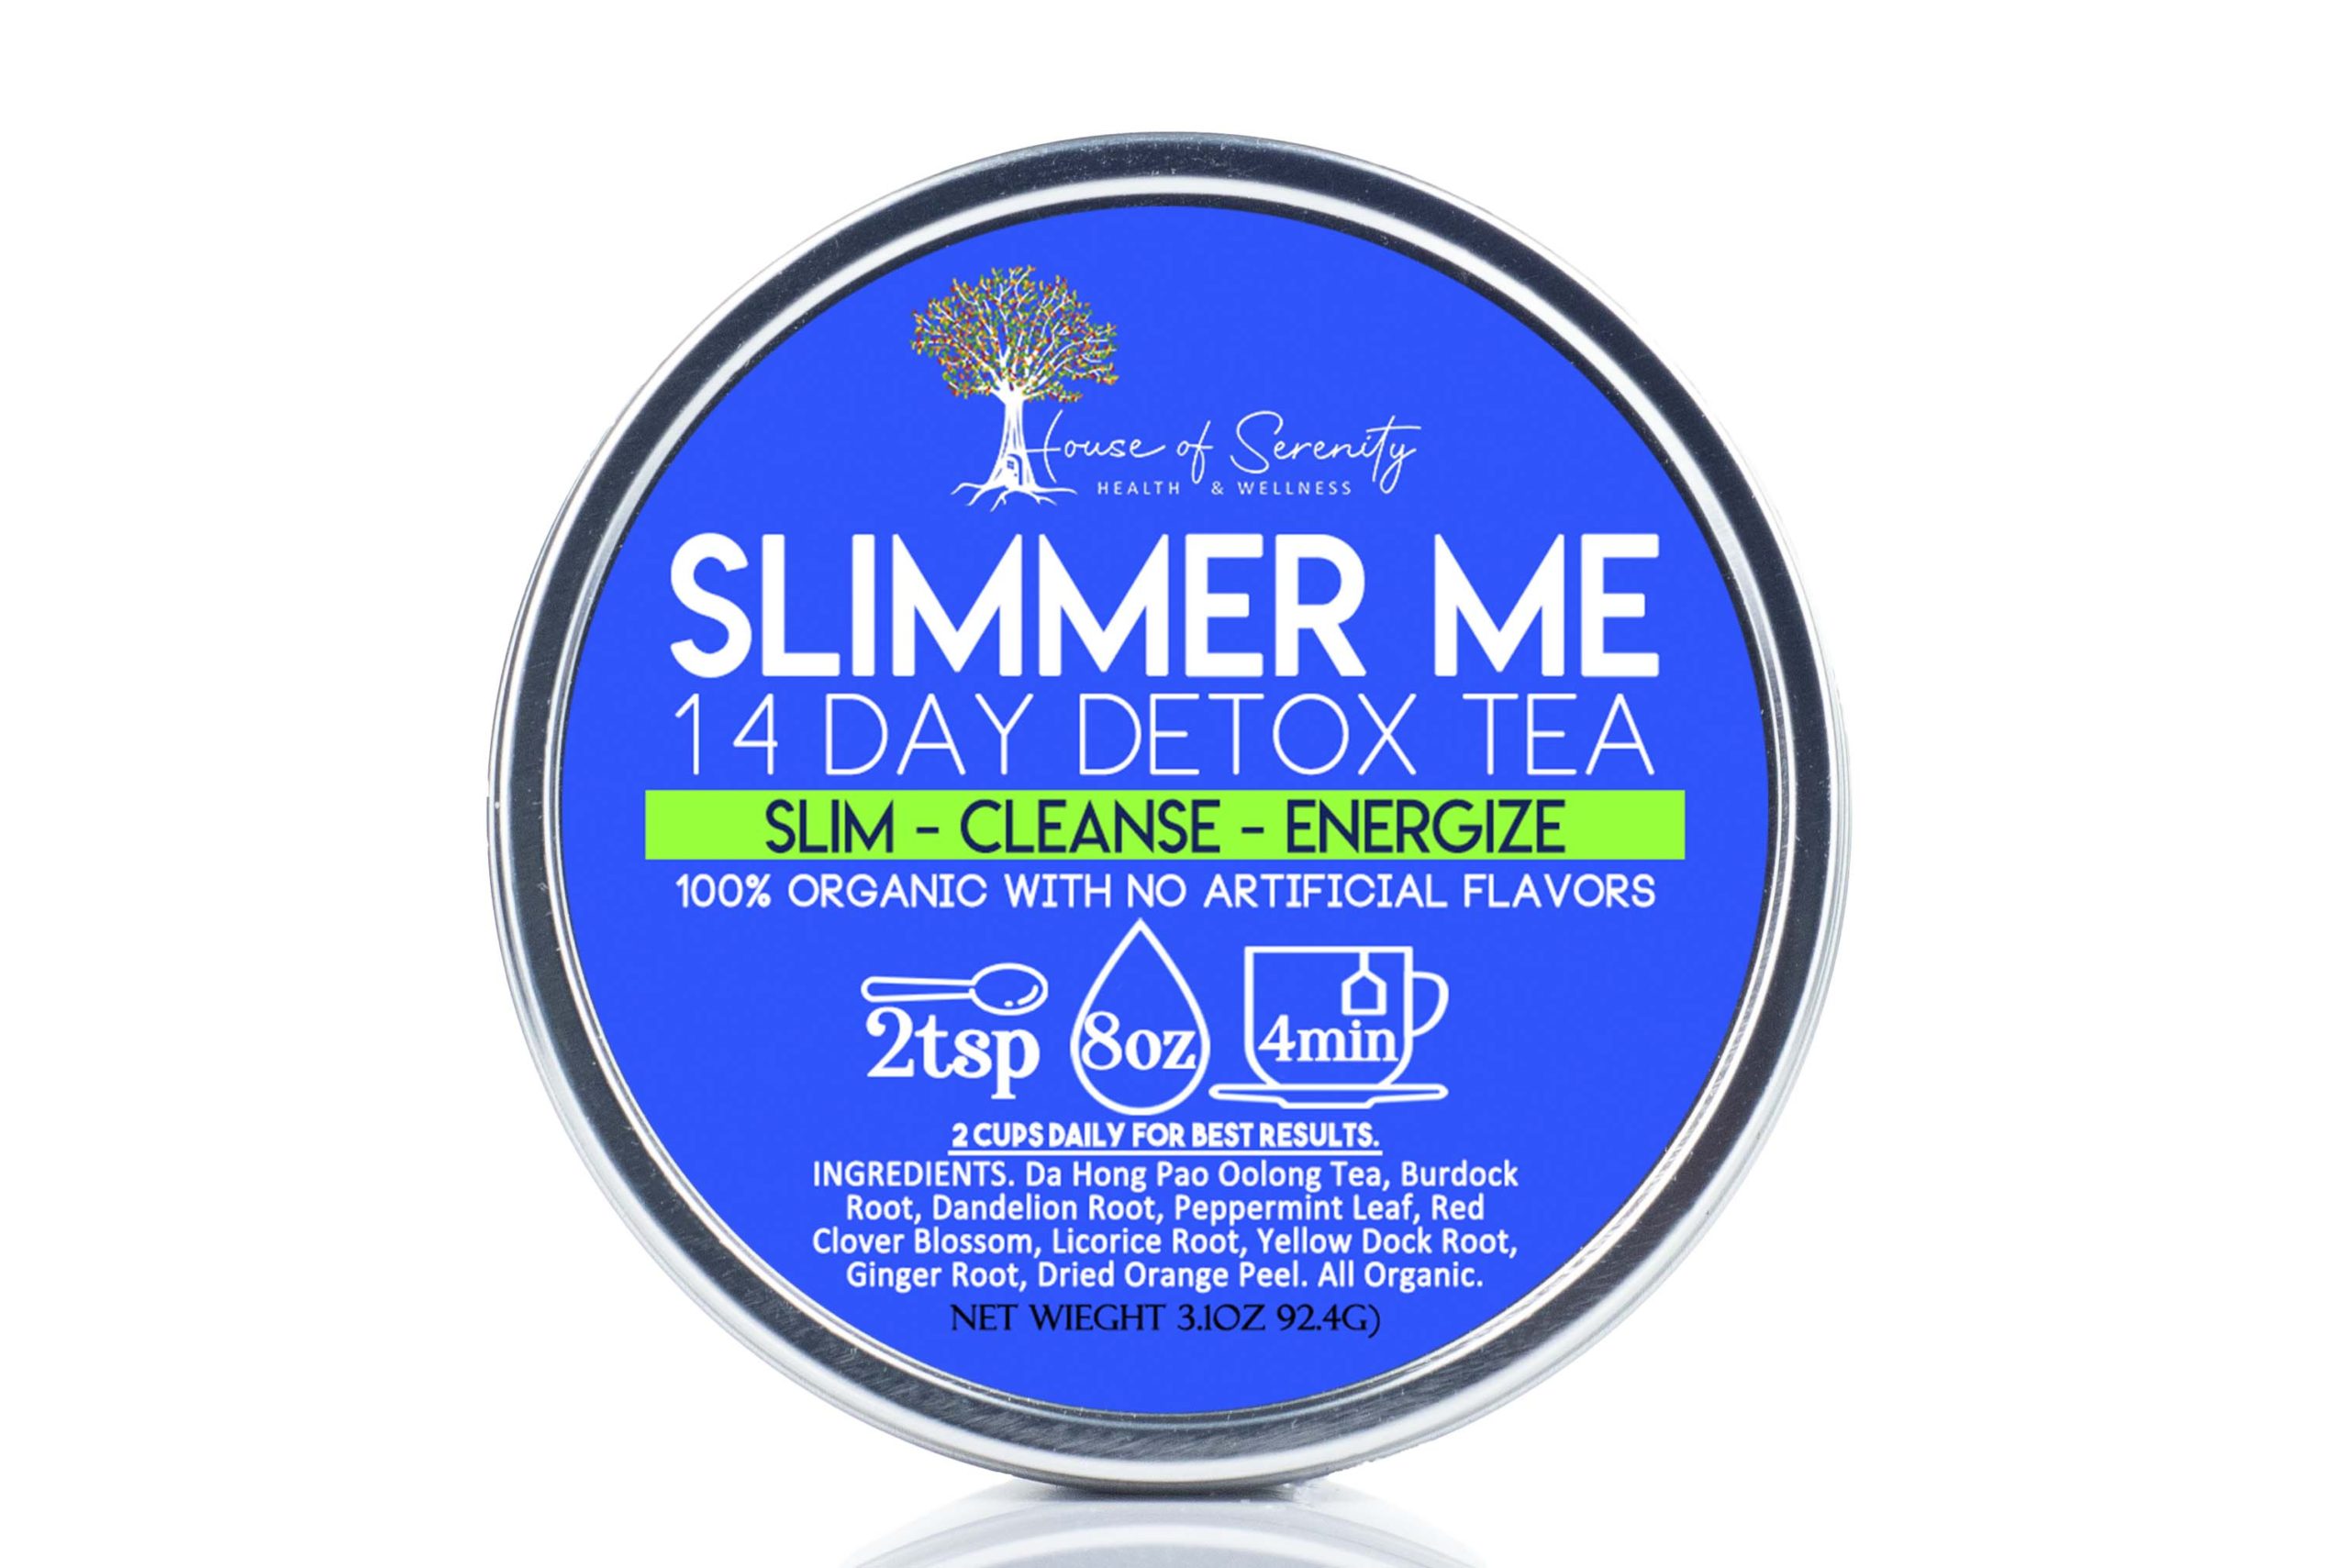 Slimmer Me Tea by House of Serenity Health and Wellness